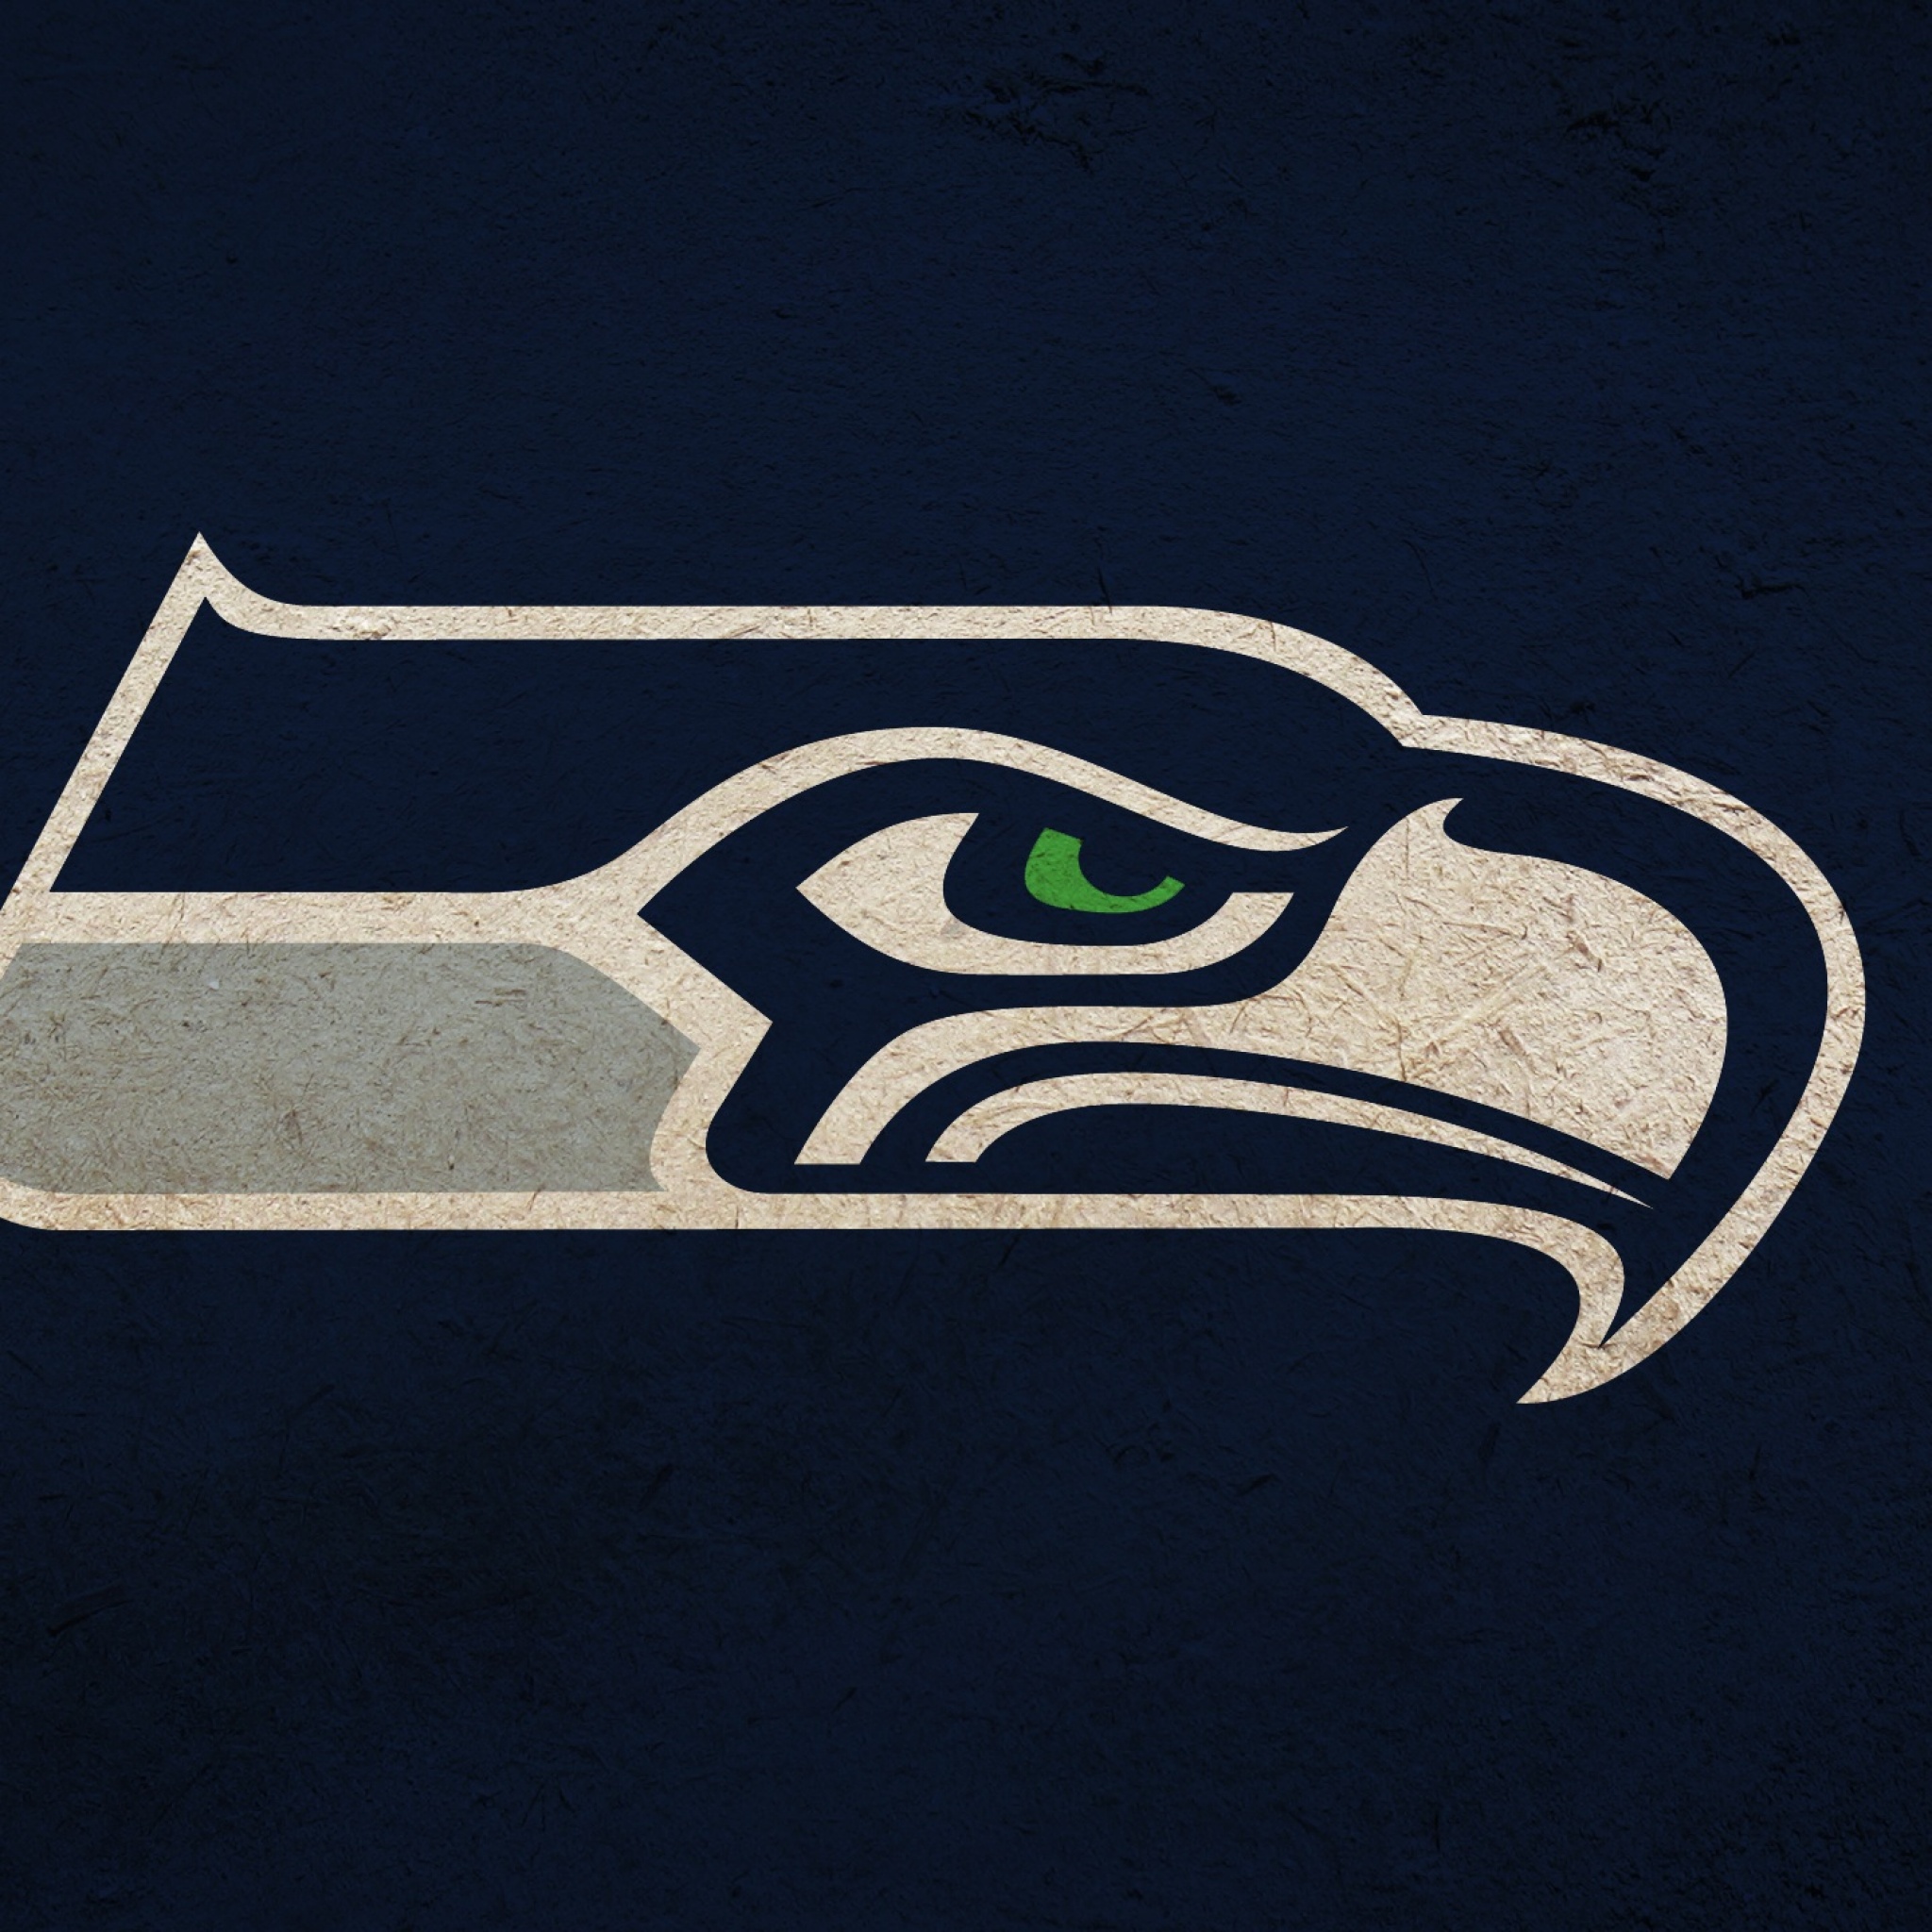 Wallpaper Of The Week Superbowl Xlix For iPhone And iPad